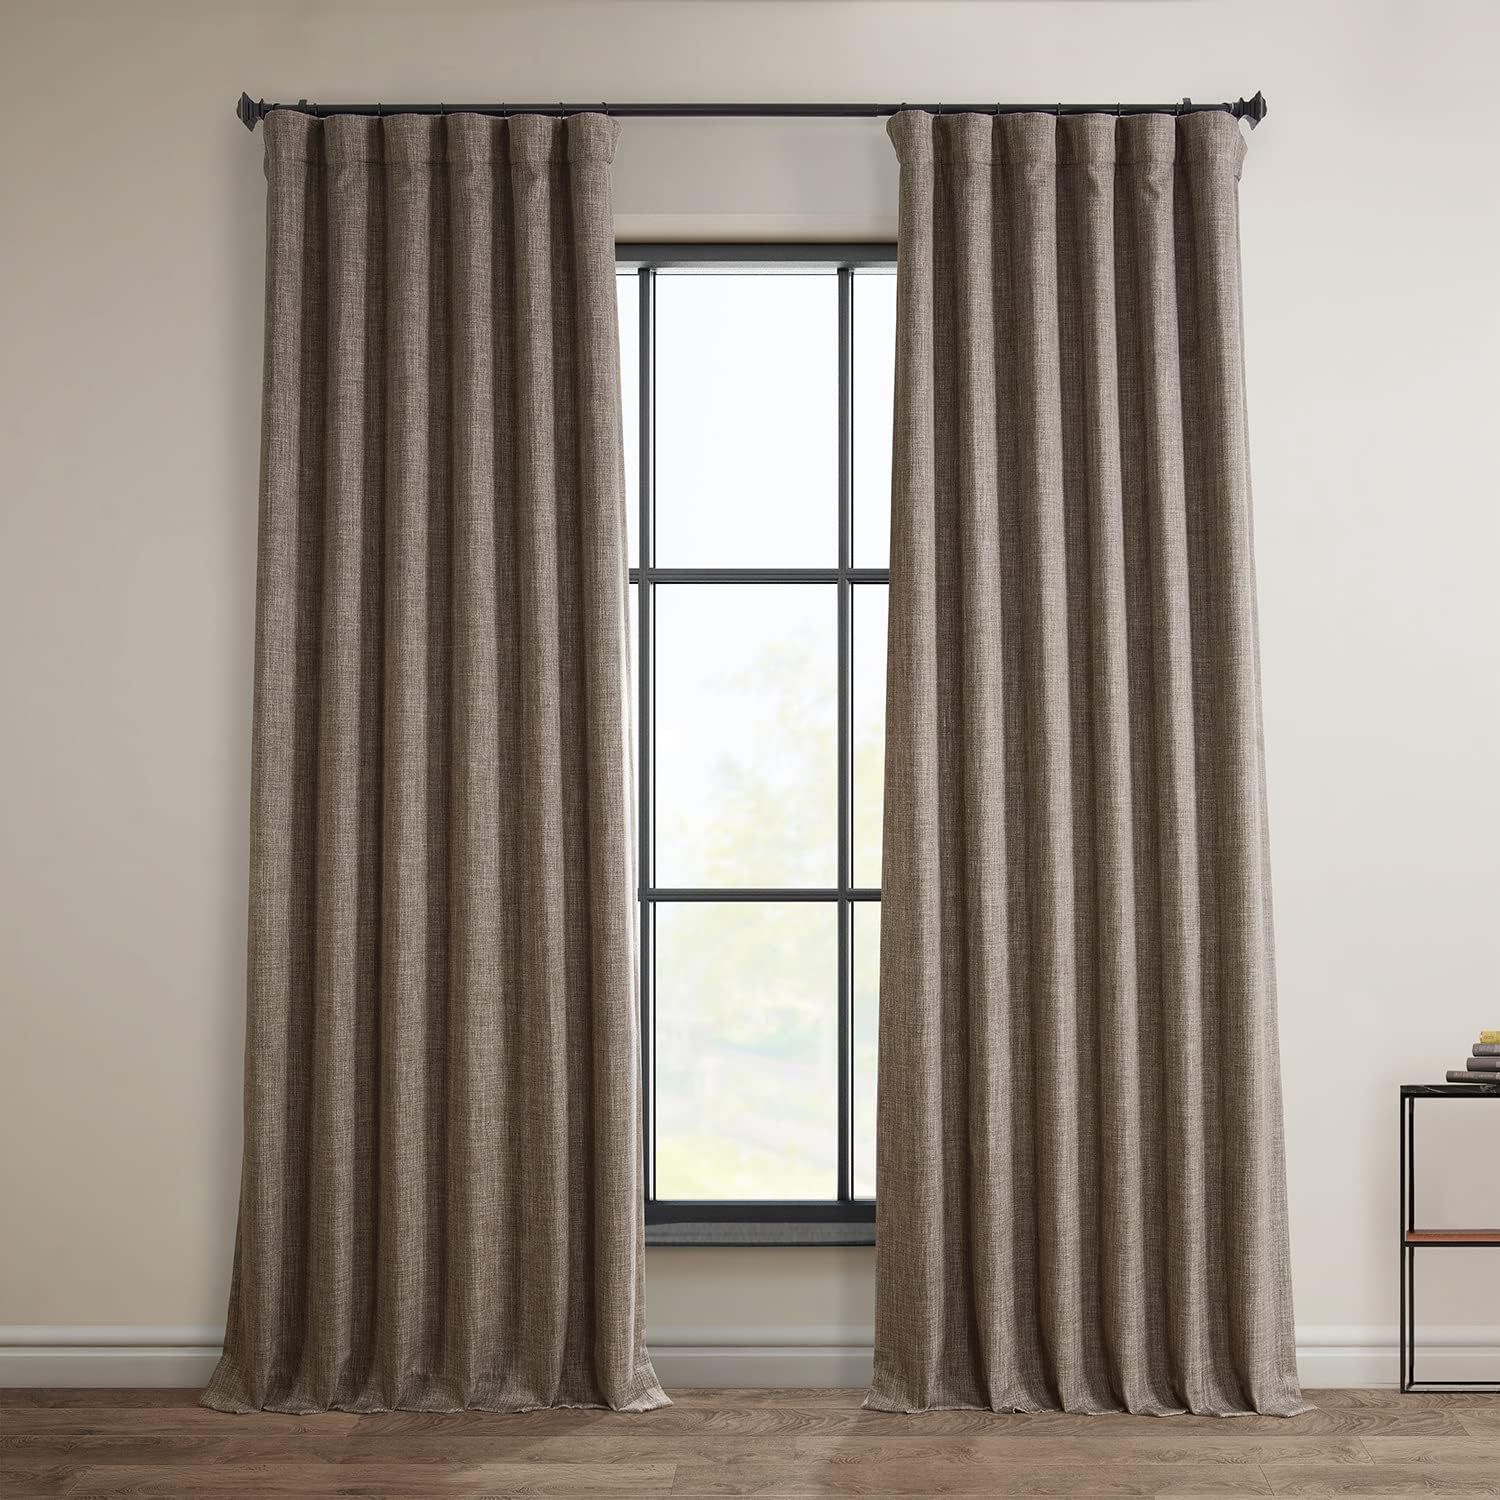 HPD Half Price Drapes Faux Linen Room Darkening Curtains - 108 Inches Long Luxury Linen Curtains for Bedroom & Living Room (1 Panel), 50W X 108L, Dutch Cocoa | Amazon (US)